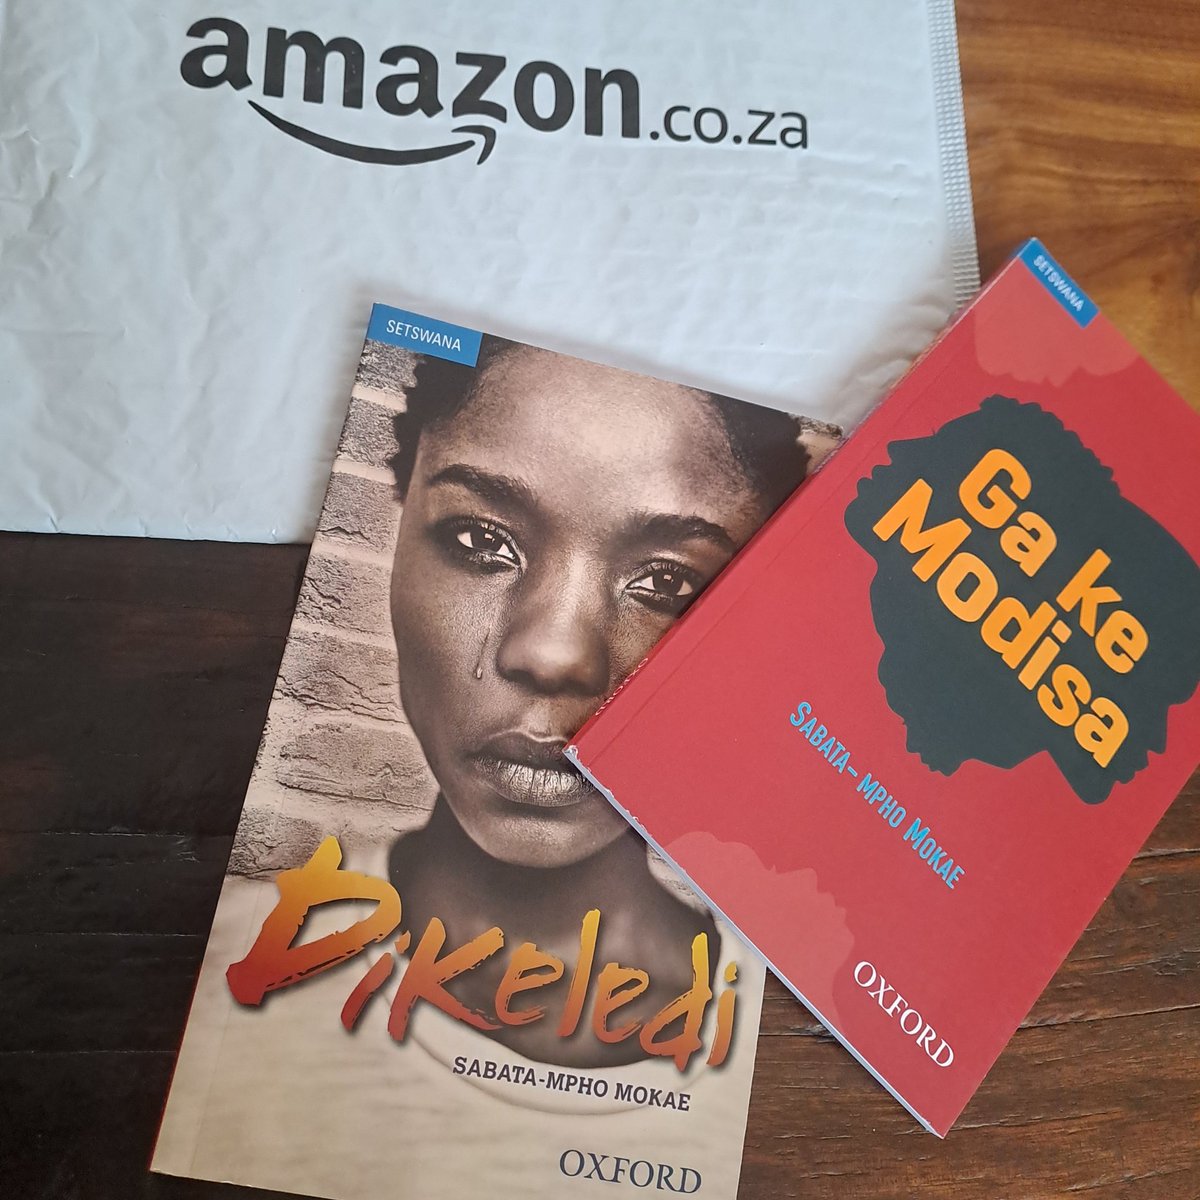 Earlier in the week, these two titles were sold out at Amazon South Africa. They have them in stock again at 50% discount (R100.98 per copy). amazon.co.za